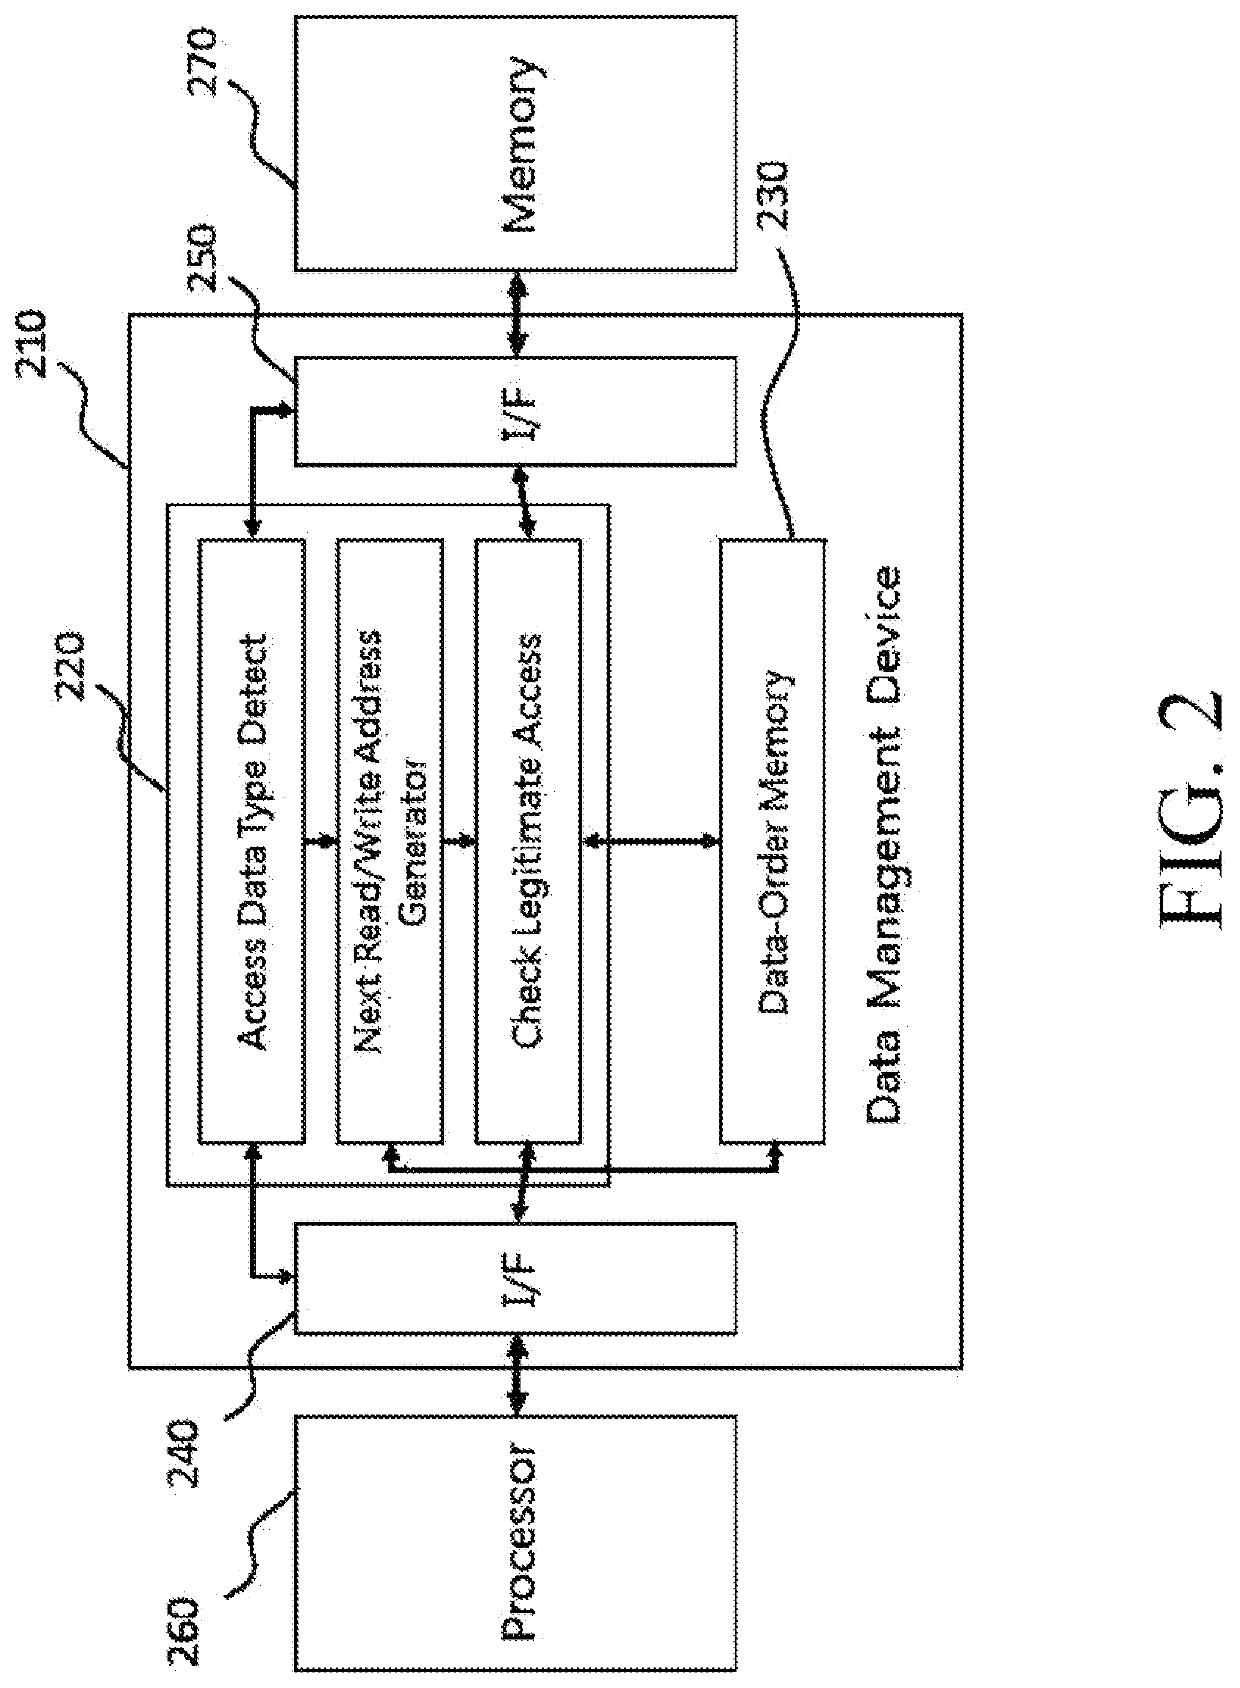 Data management device for supporting high speed artificial neural network operation by using data caching based on data locality of artificial neural network